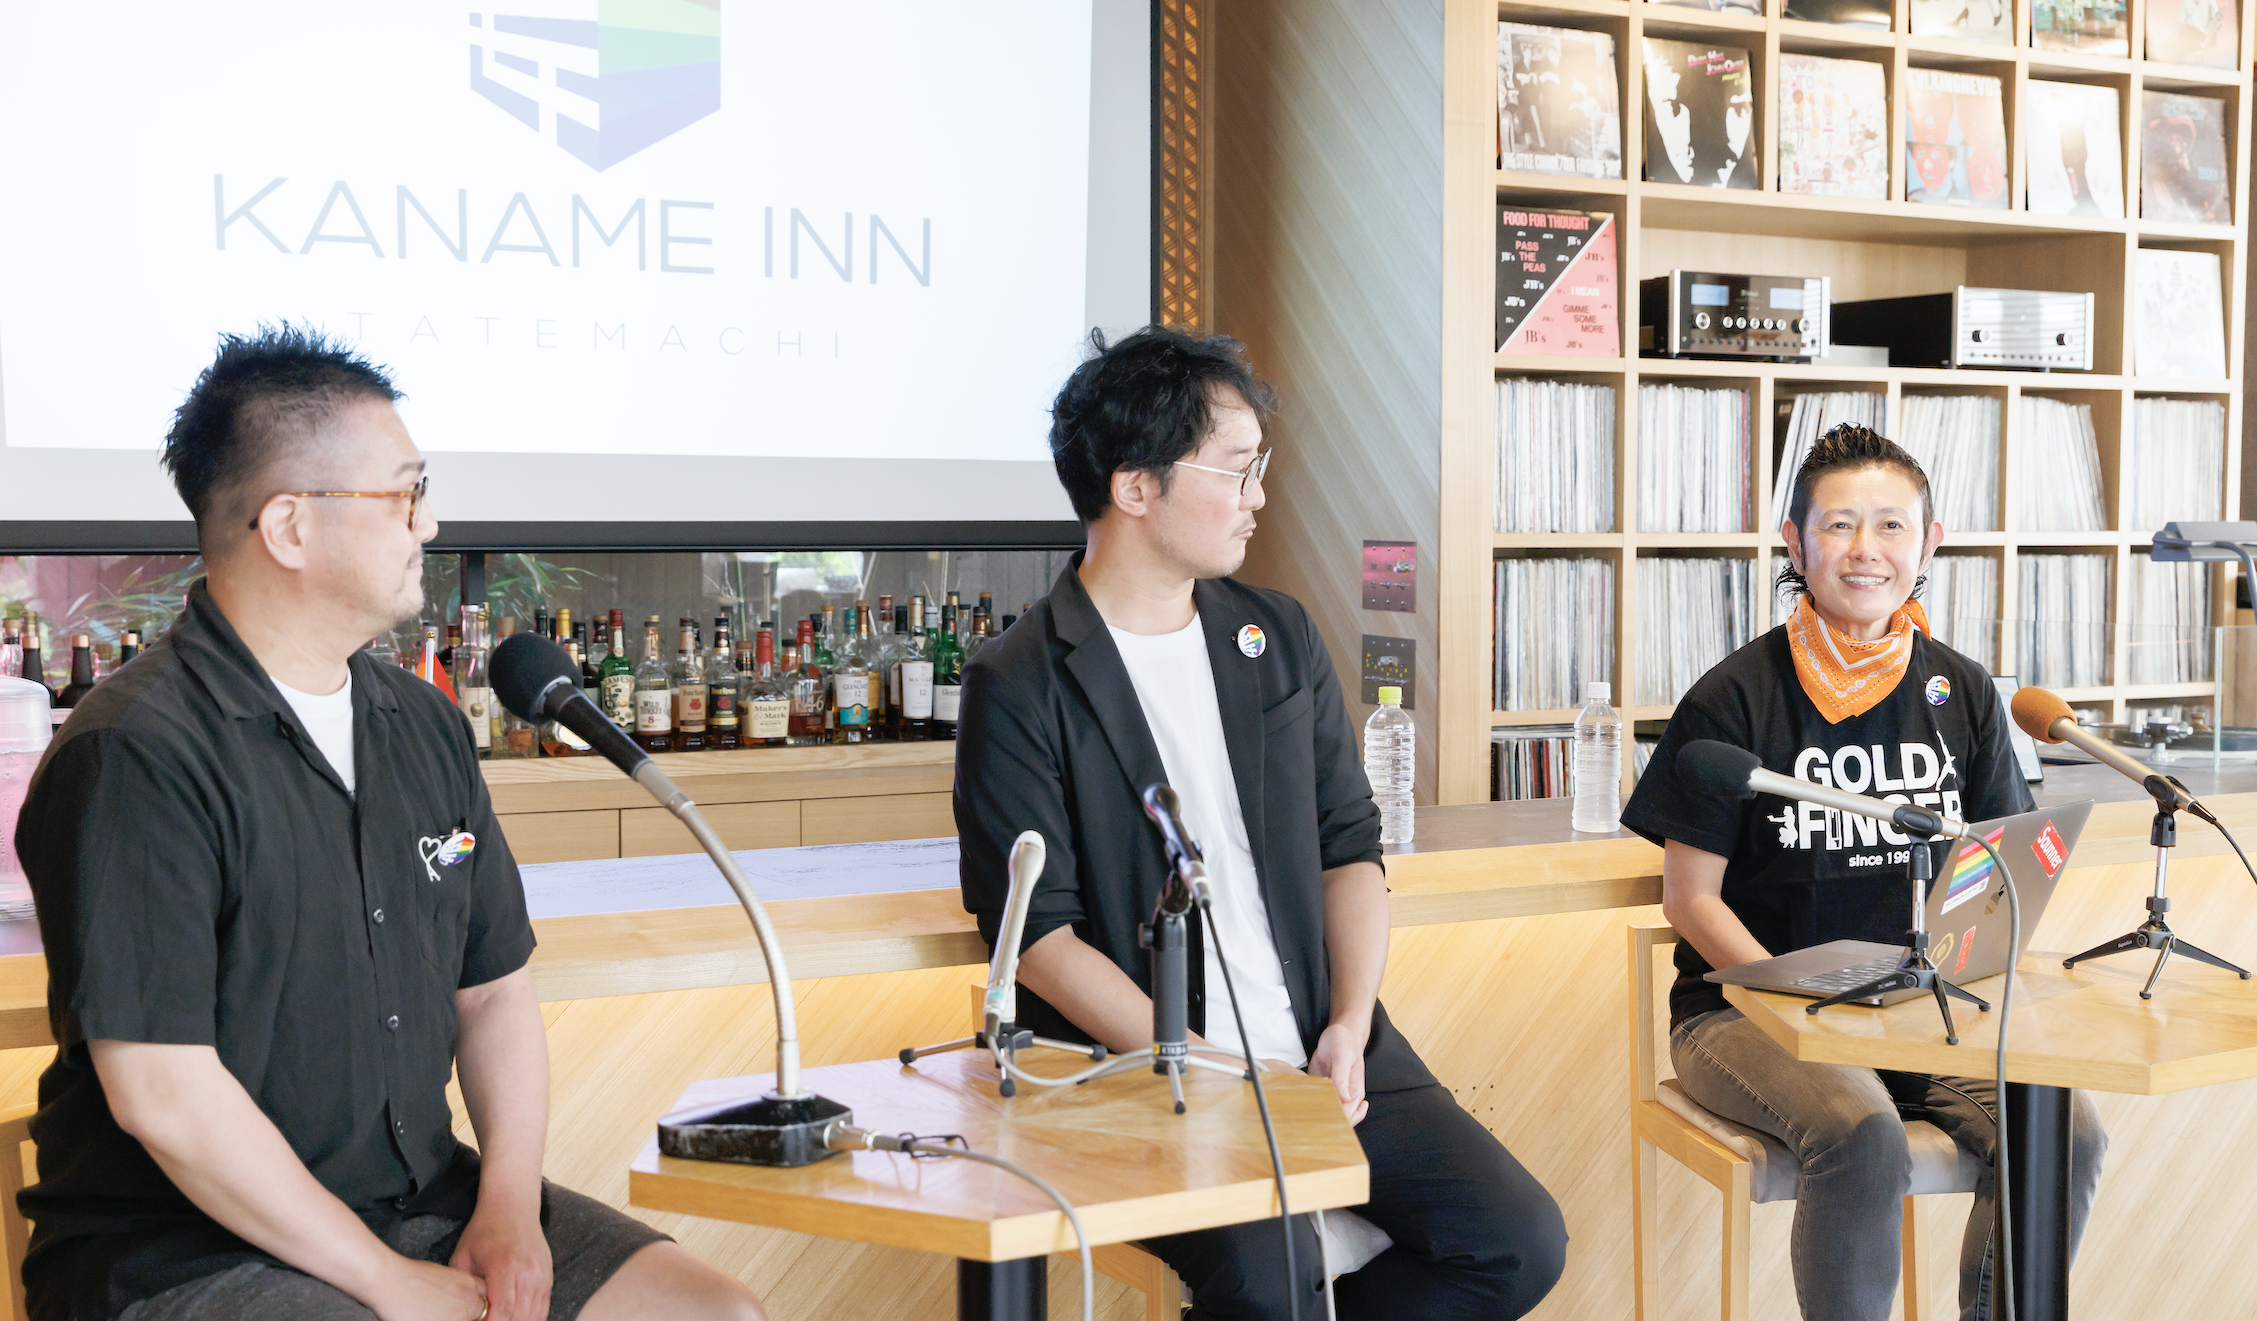 From left to right, Chief Diversity Officer Matsunaka, President Hosokawa, and Chief Communications Officer Ogawa speak at the June 23rd Press Conference on LGBTQ+ initiatives at Kaname Inn Tatemachi